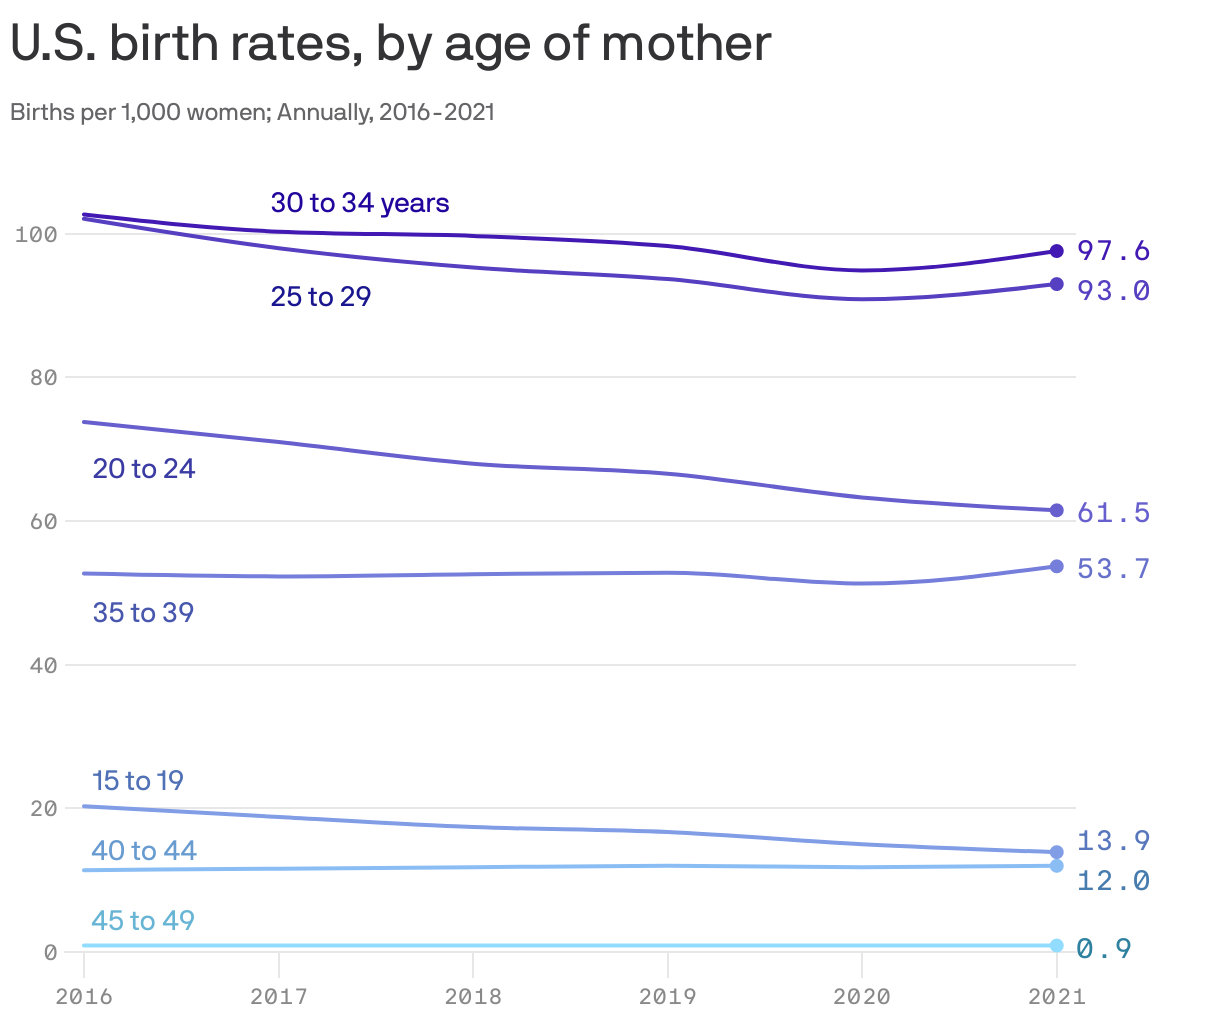 U.S. birth rates, by age of mother